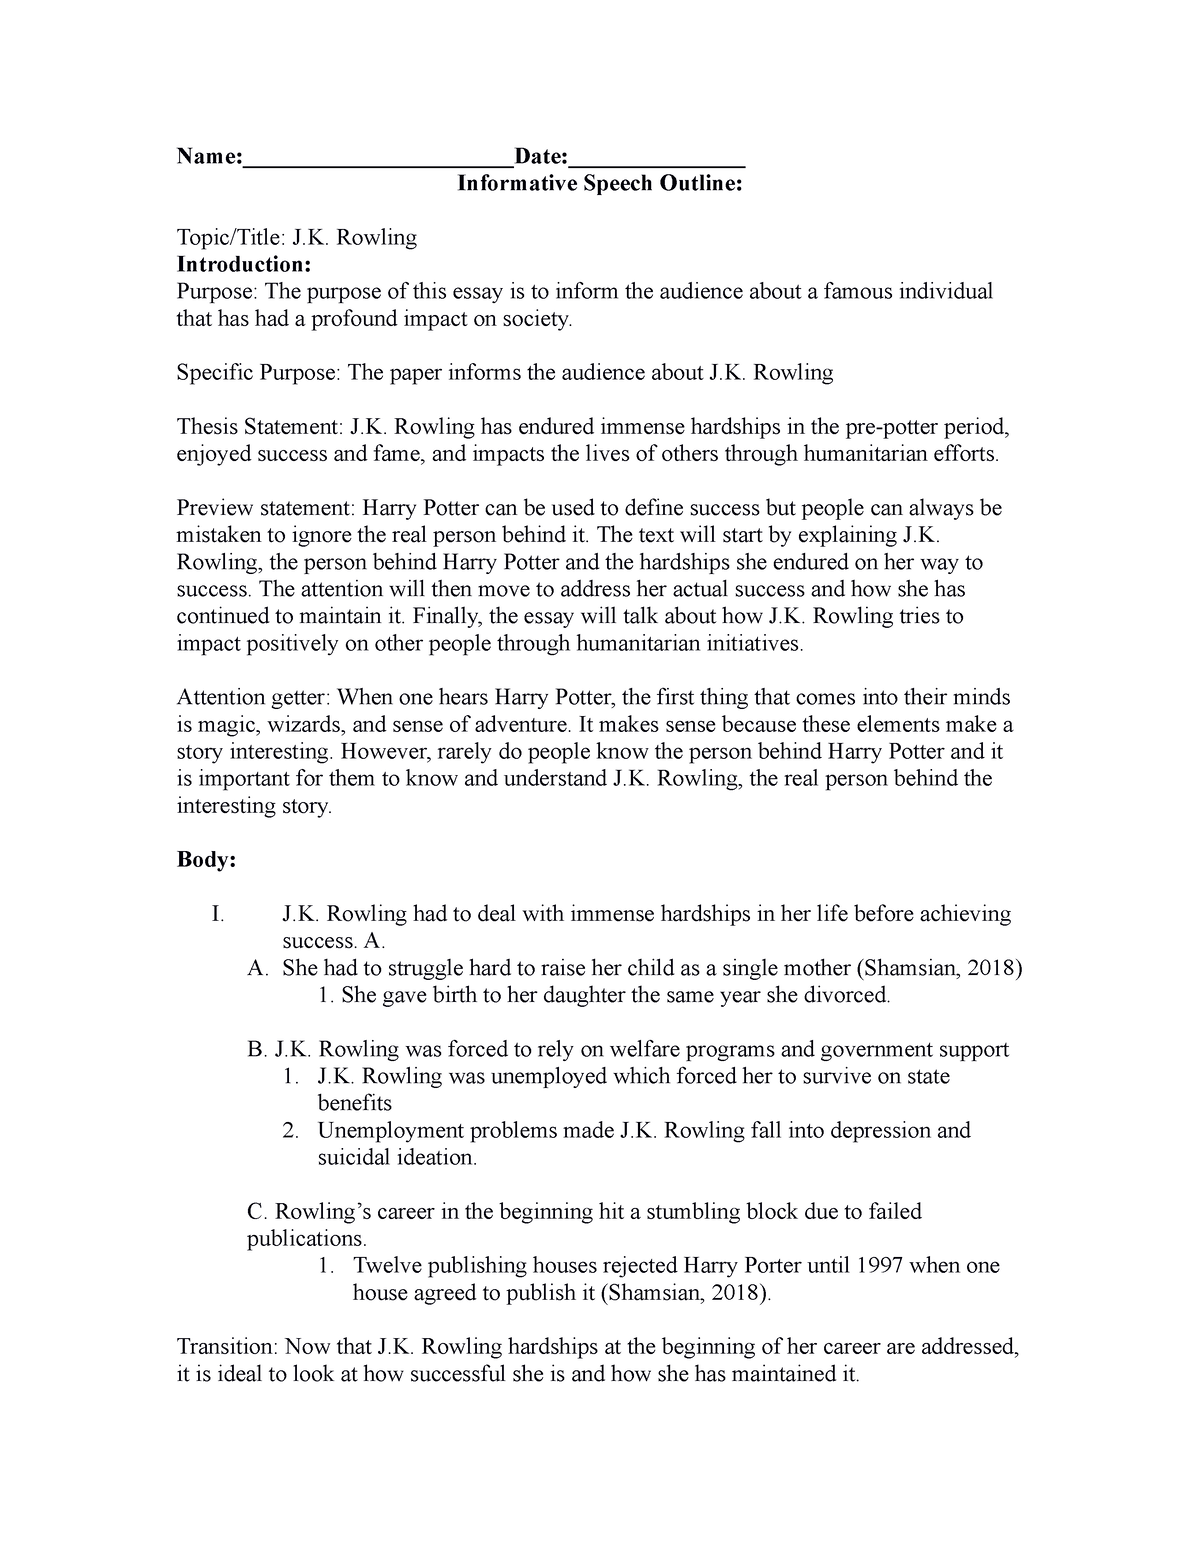 Informative Speech Outline Template(1) - Name:________Date: Informative ...